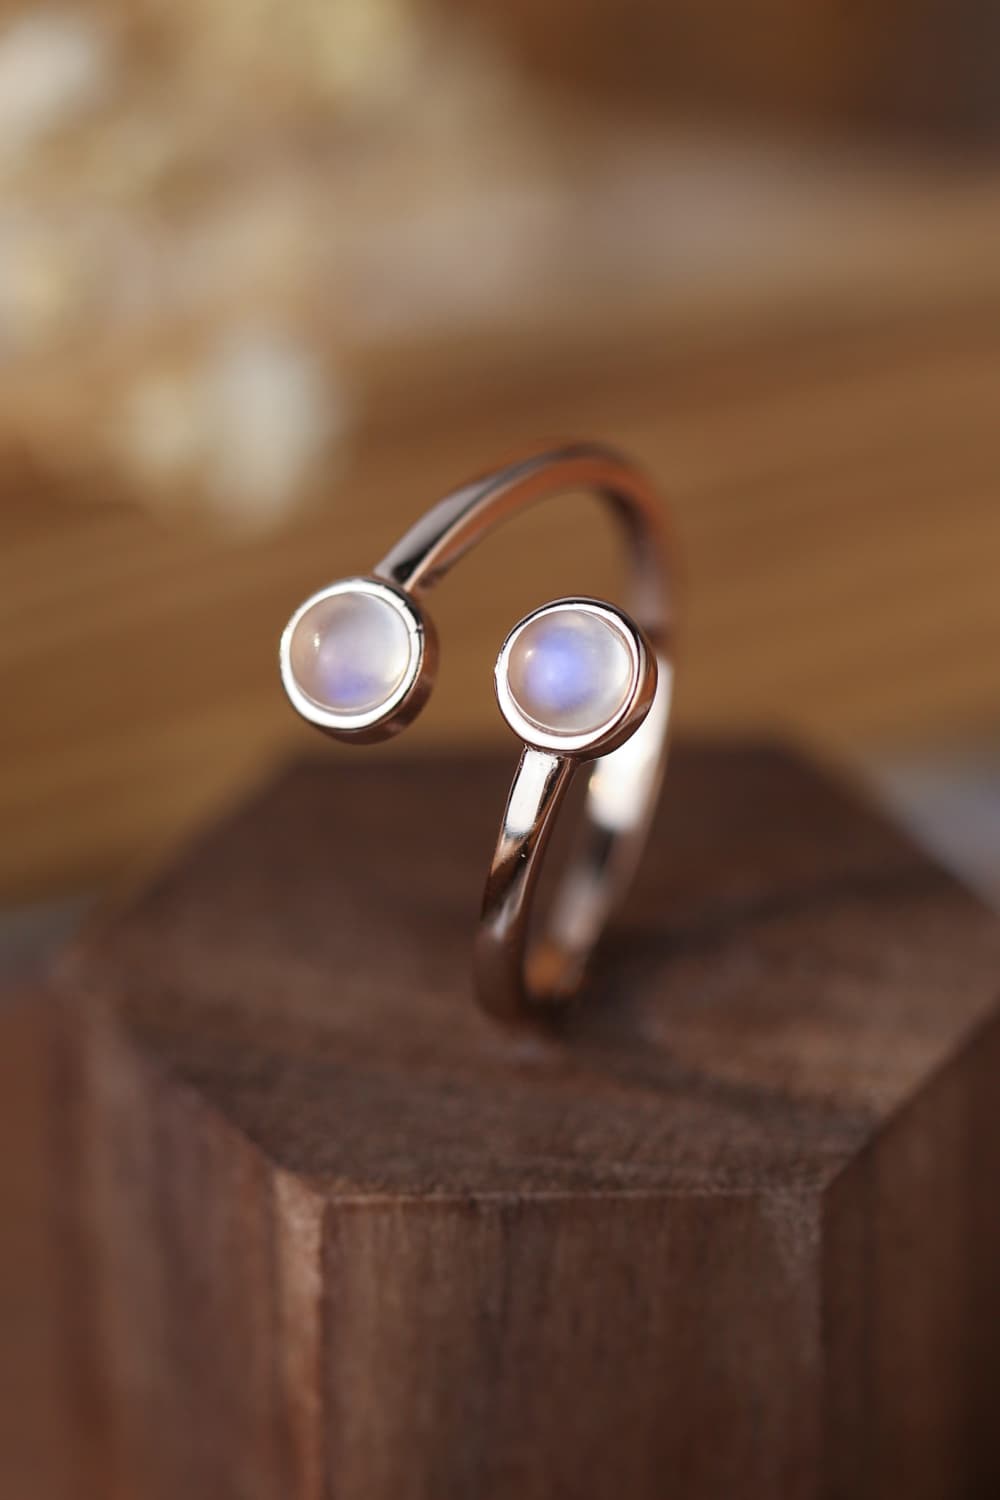 High Quality Natural Moonstone 925 Sterling Silver Toi Et Moi Ring - FunkyPeacockStore (Store description)